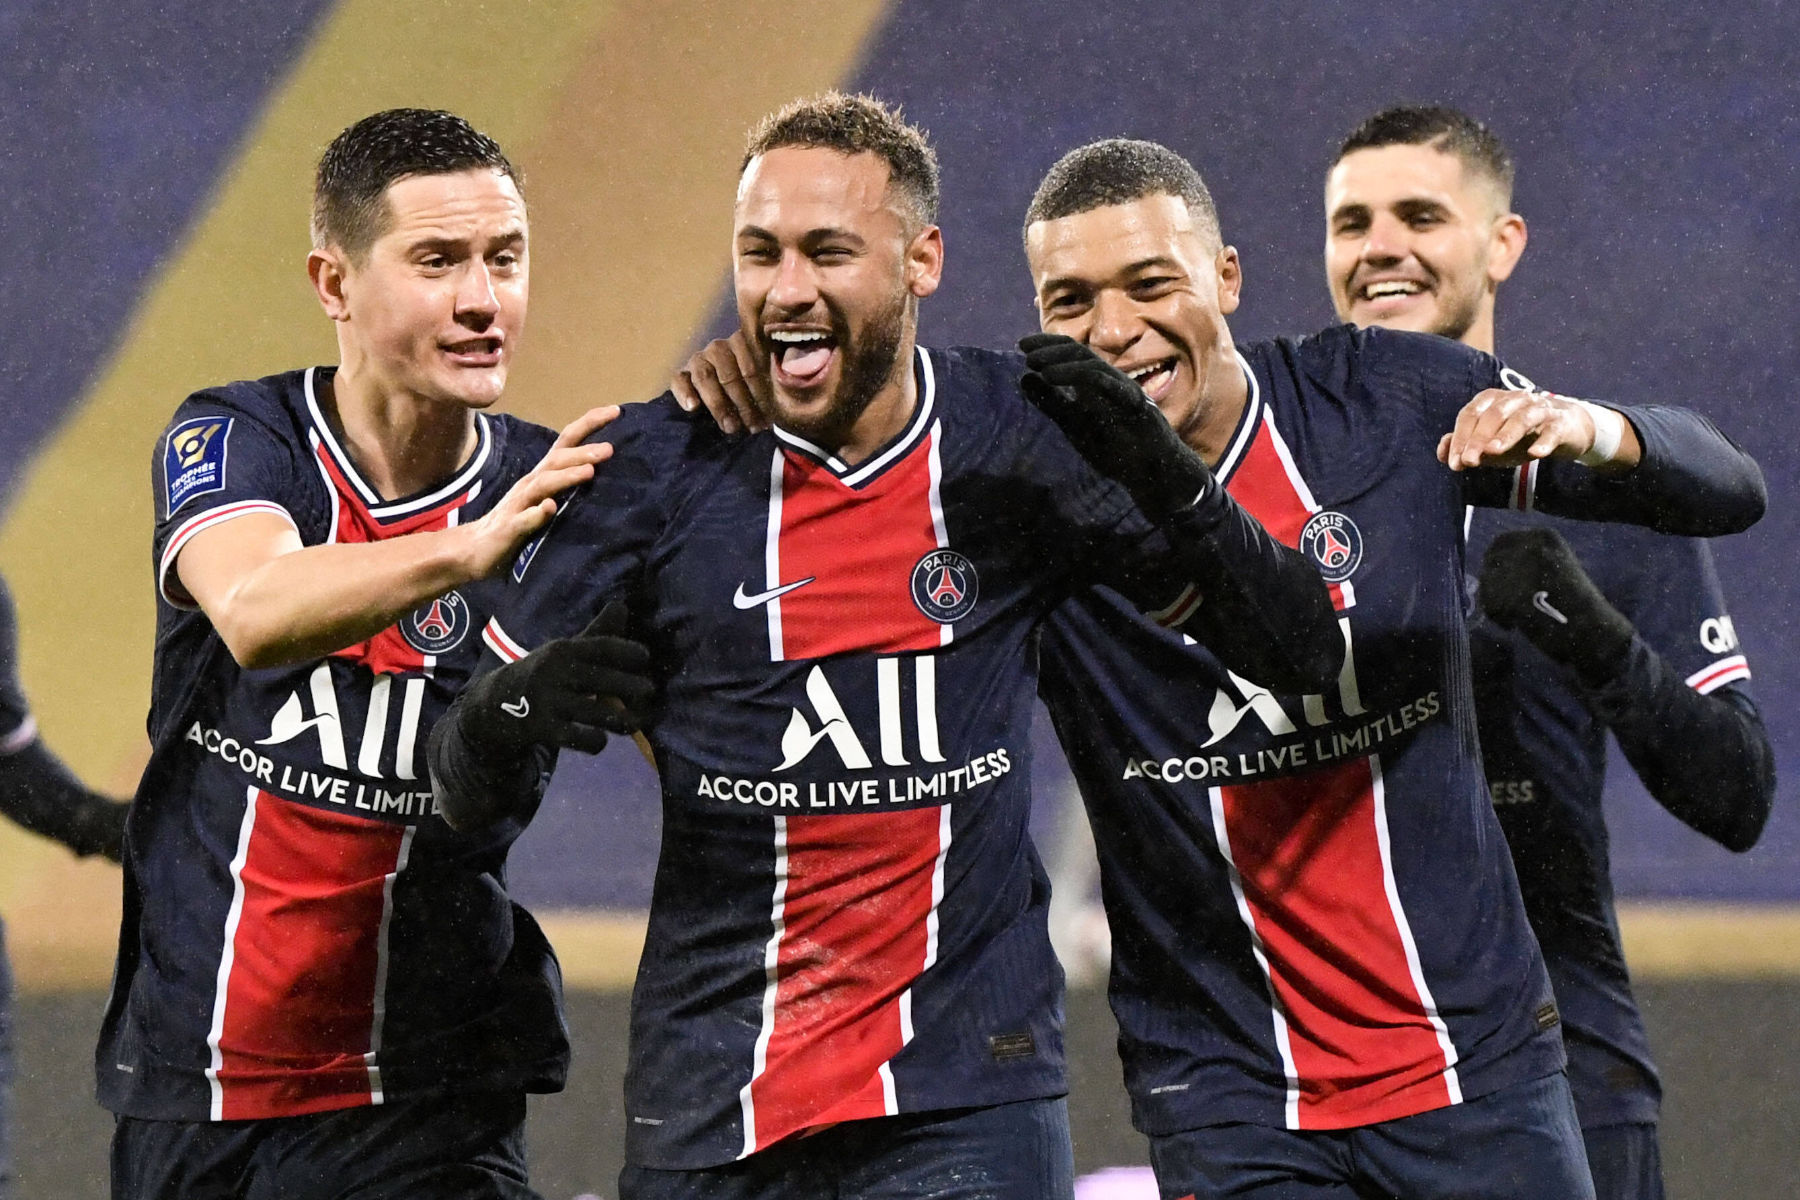 PSG Named One of the Most Valuable Sports Teams in the World  PSG Talk